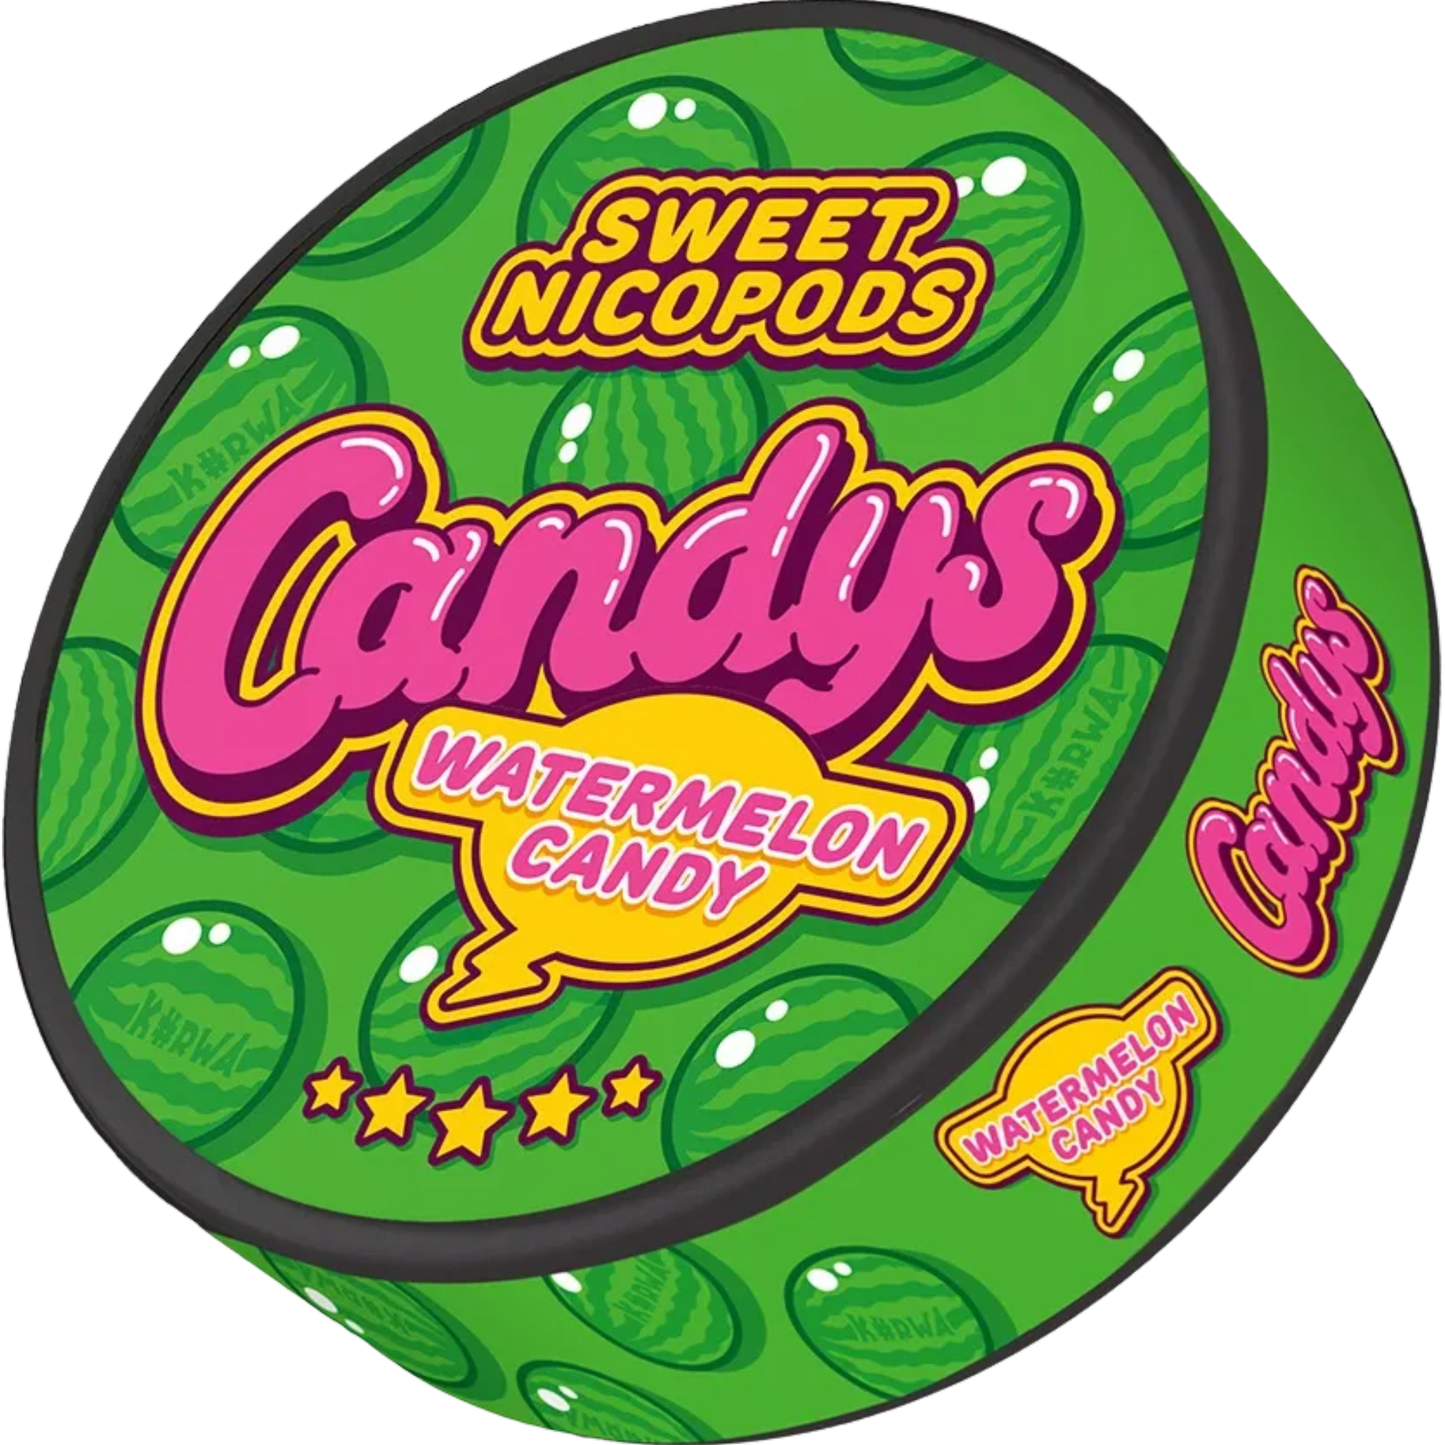 Candys Watermelon Candy - 46.9mg